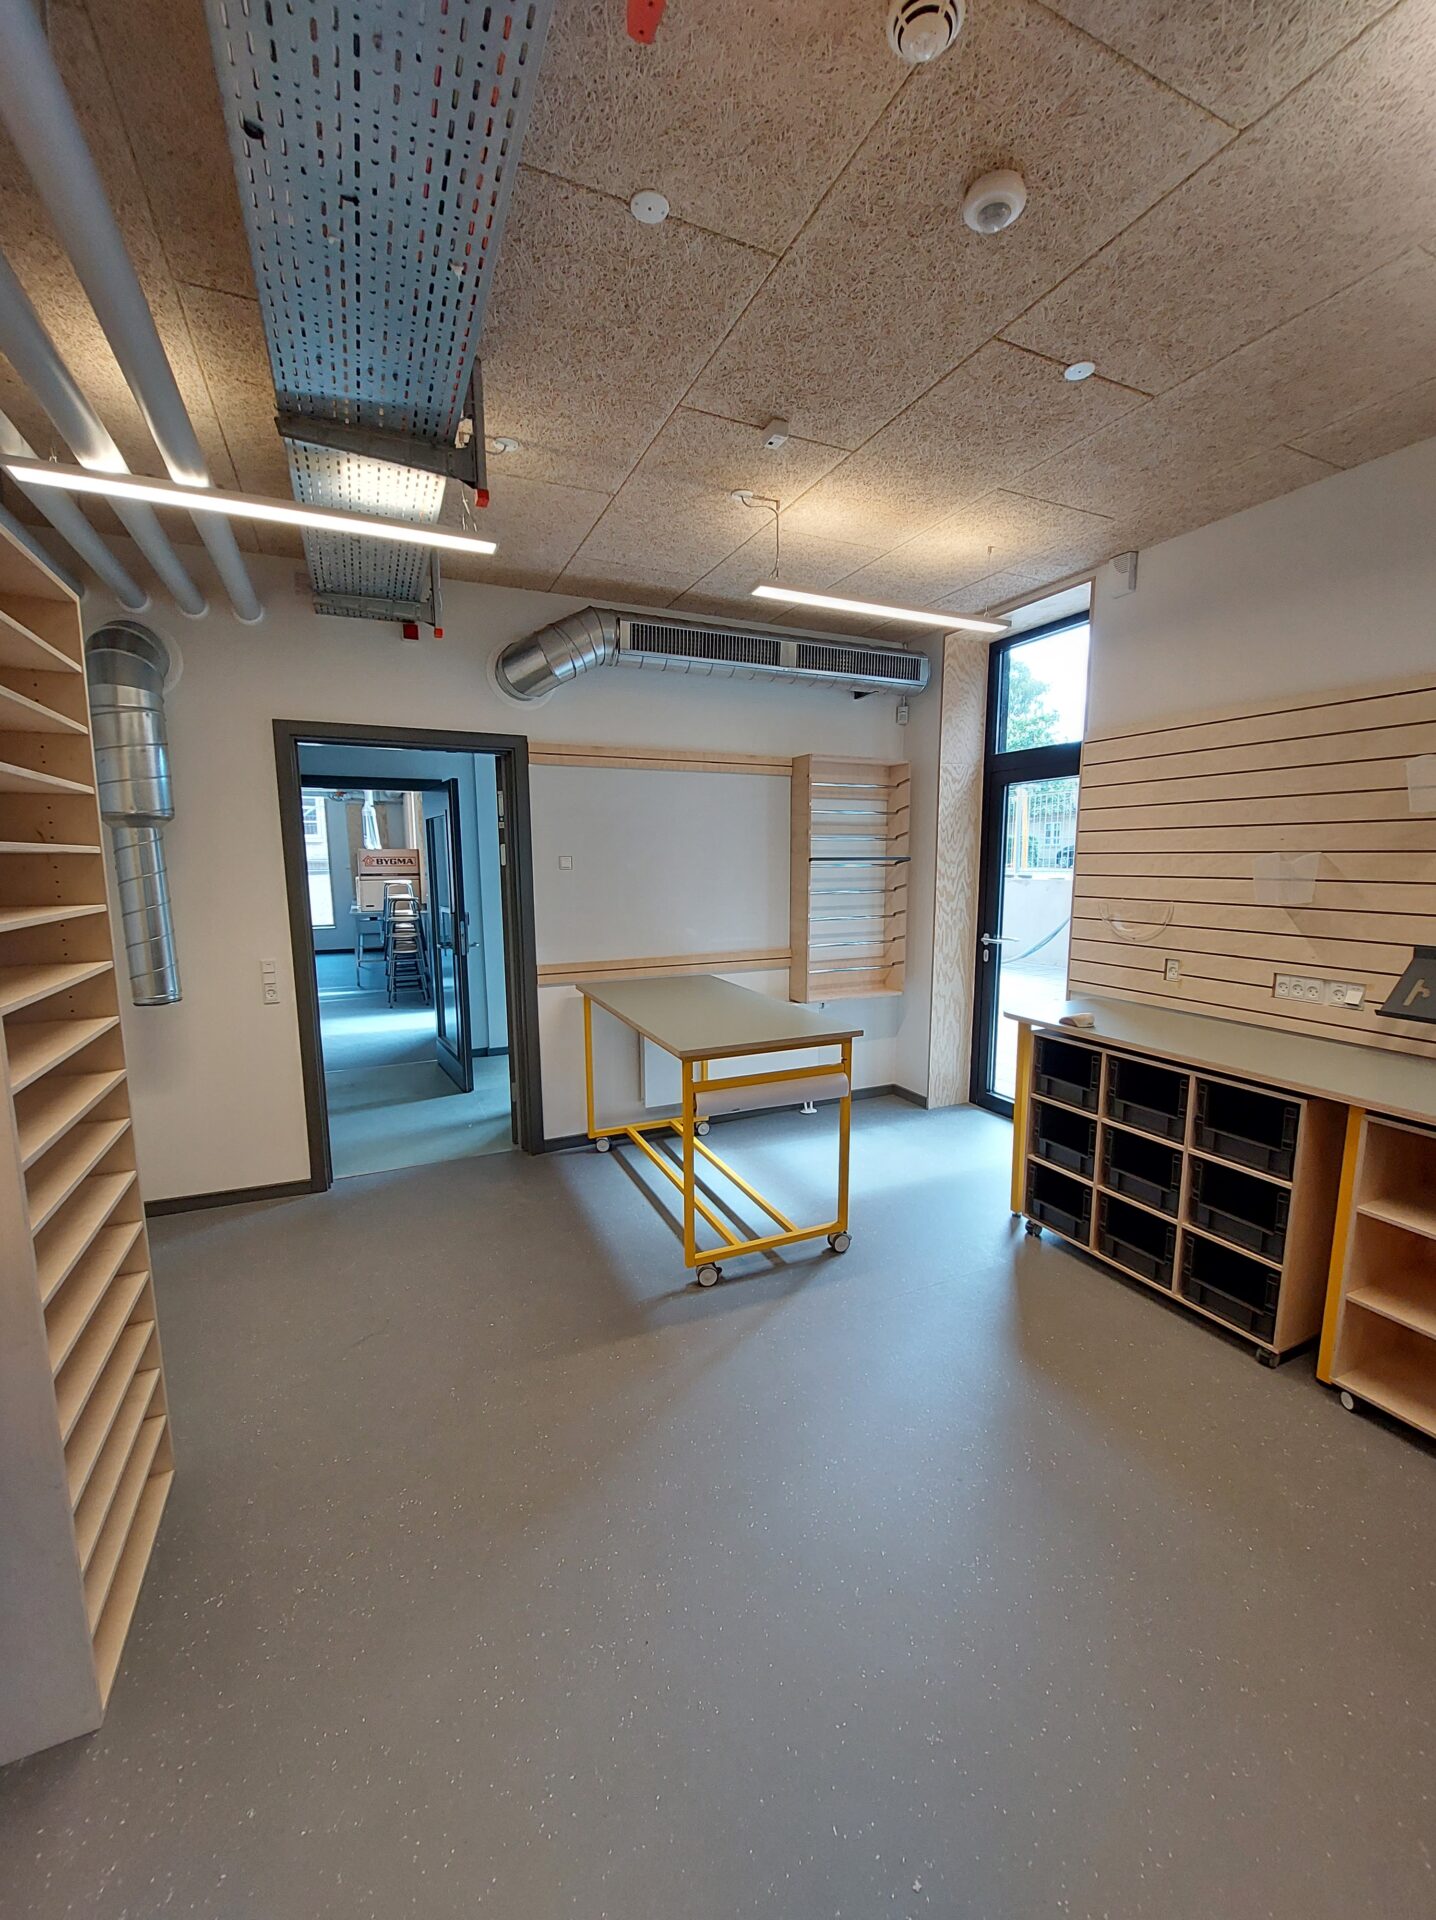 Makerspace - Osted Skole 6